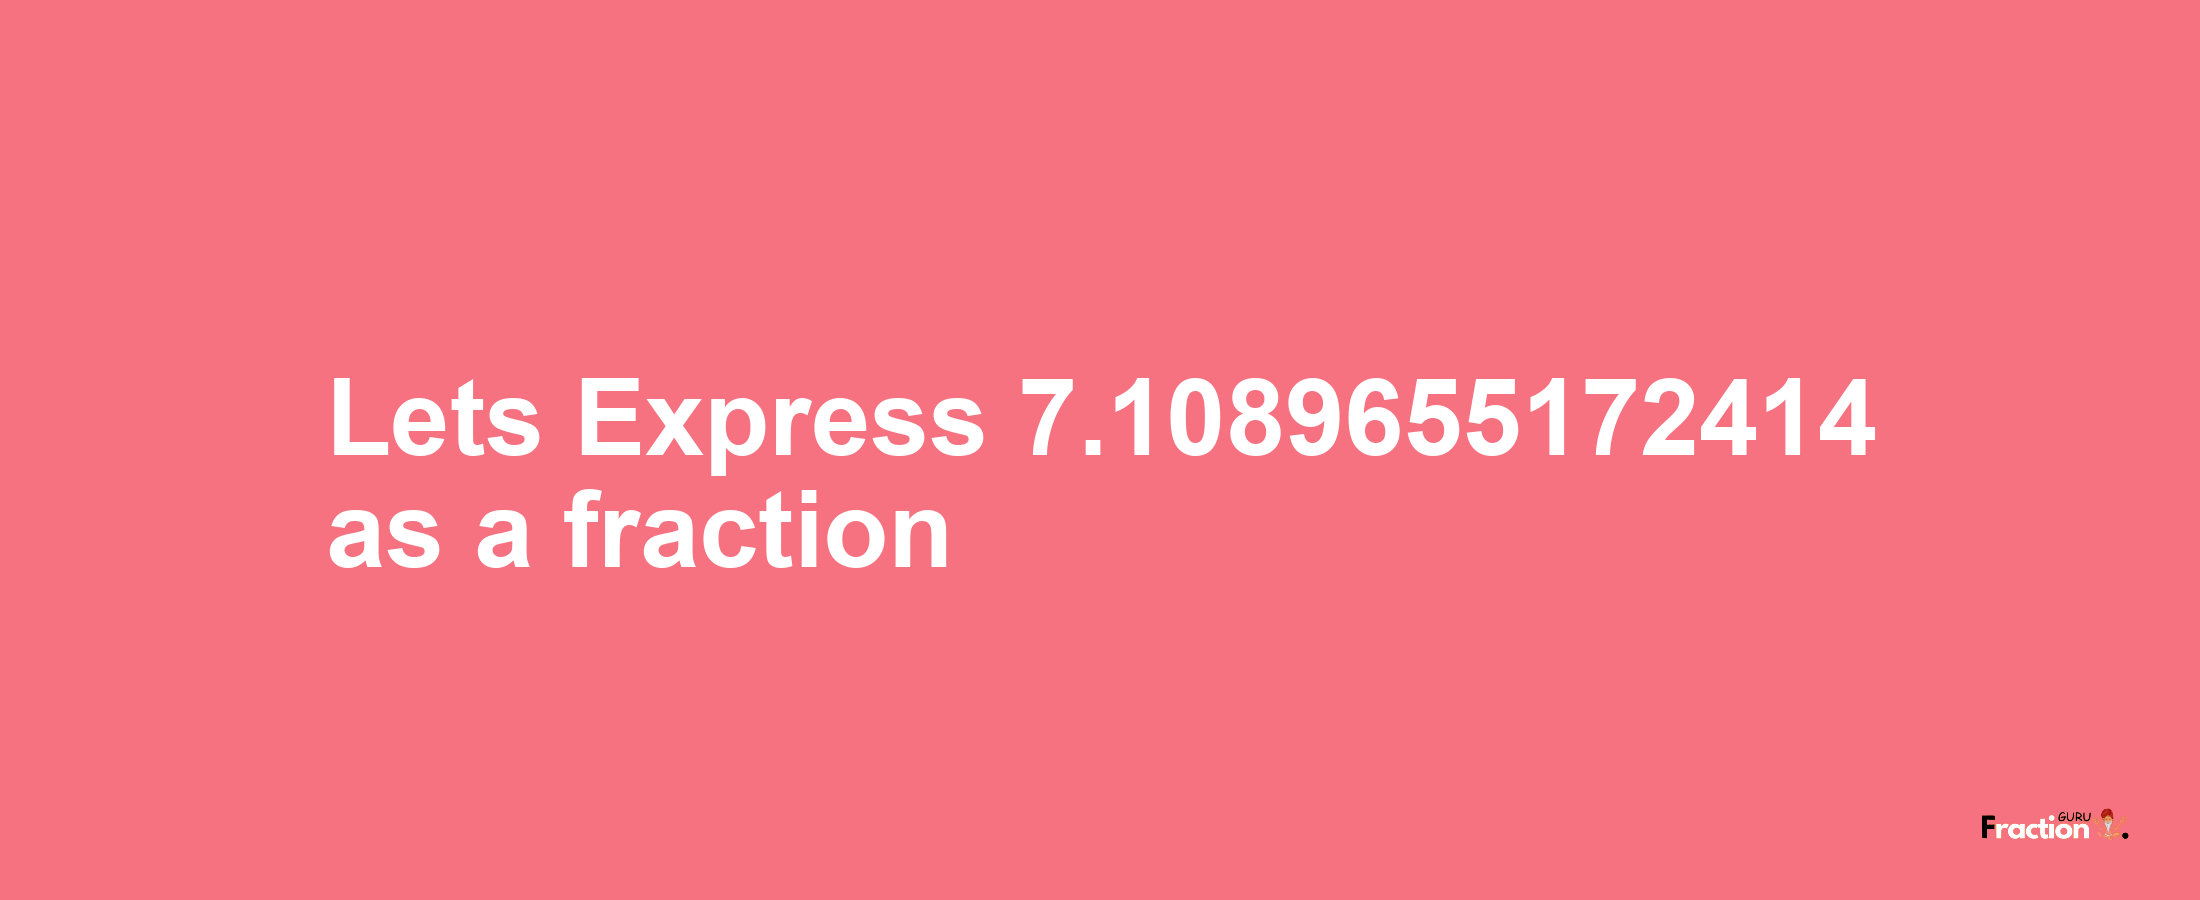 Lets Express 7.1089655172414 as afraction